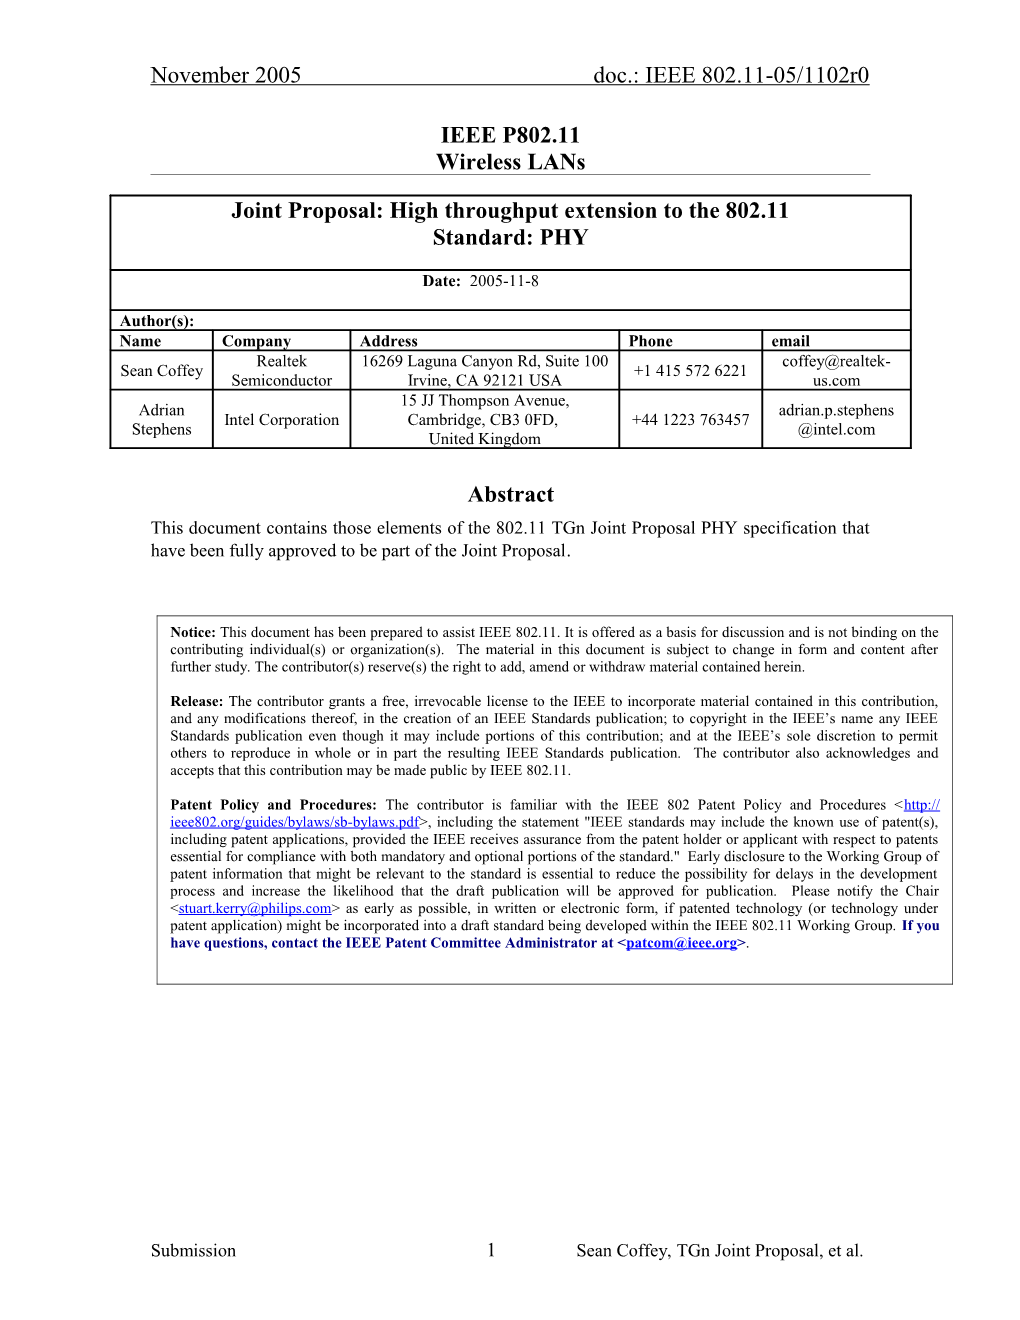 Joint Proposal PHY Specification